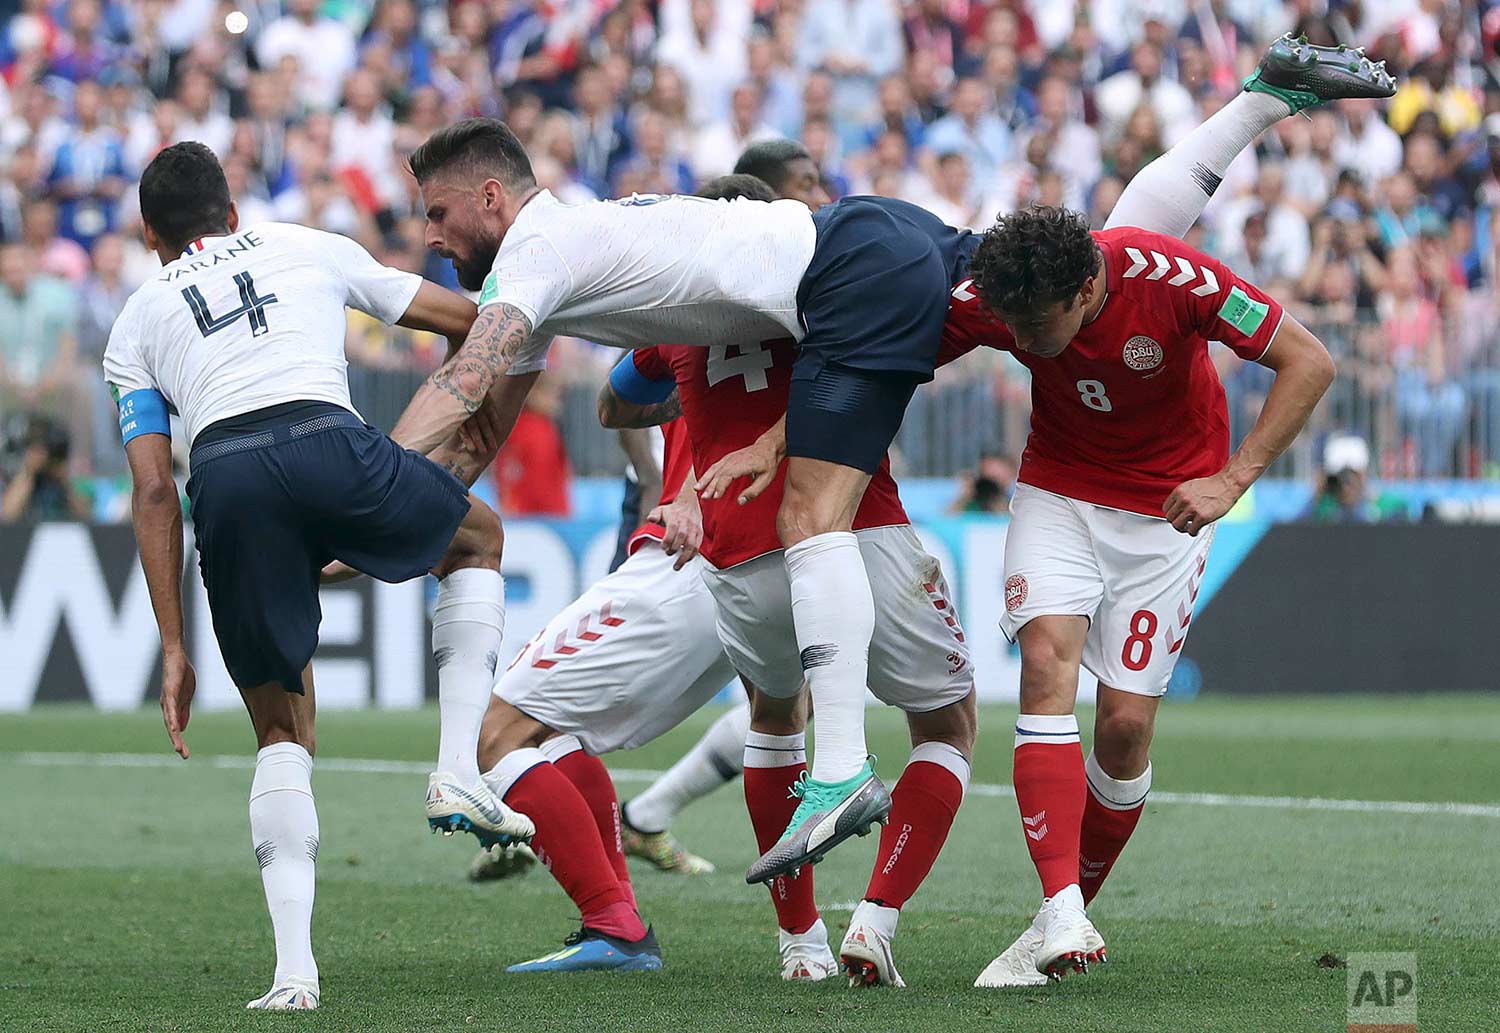  France's Olivier Giroud, center, goes down after a header during the group C match between Denmark and France at the 2018 soccer World Cup at the Luzhniki Stadium in Moscow, Russia, Tuesday, June 26, 2018. (AP Photo/David Vincent) 